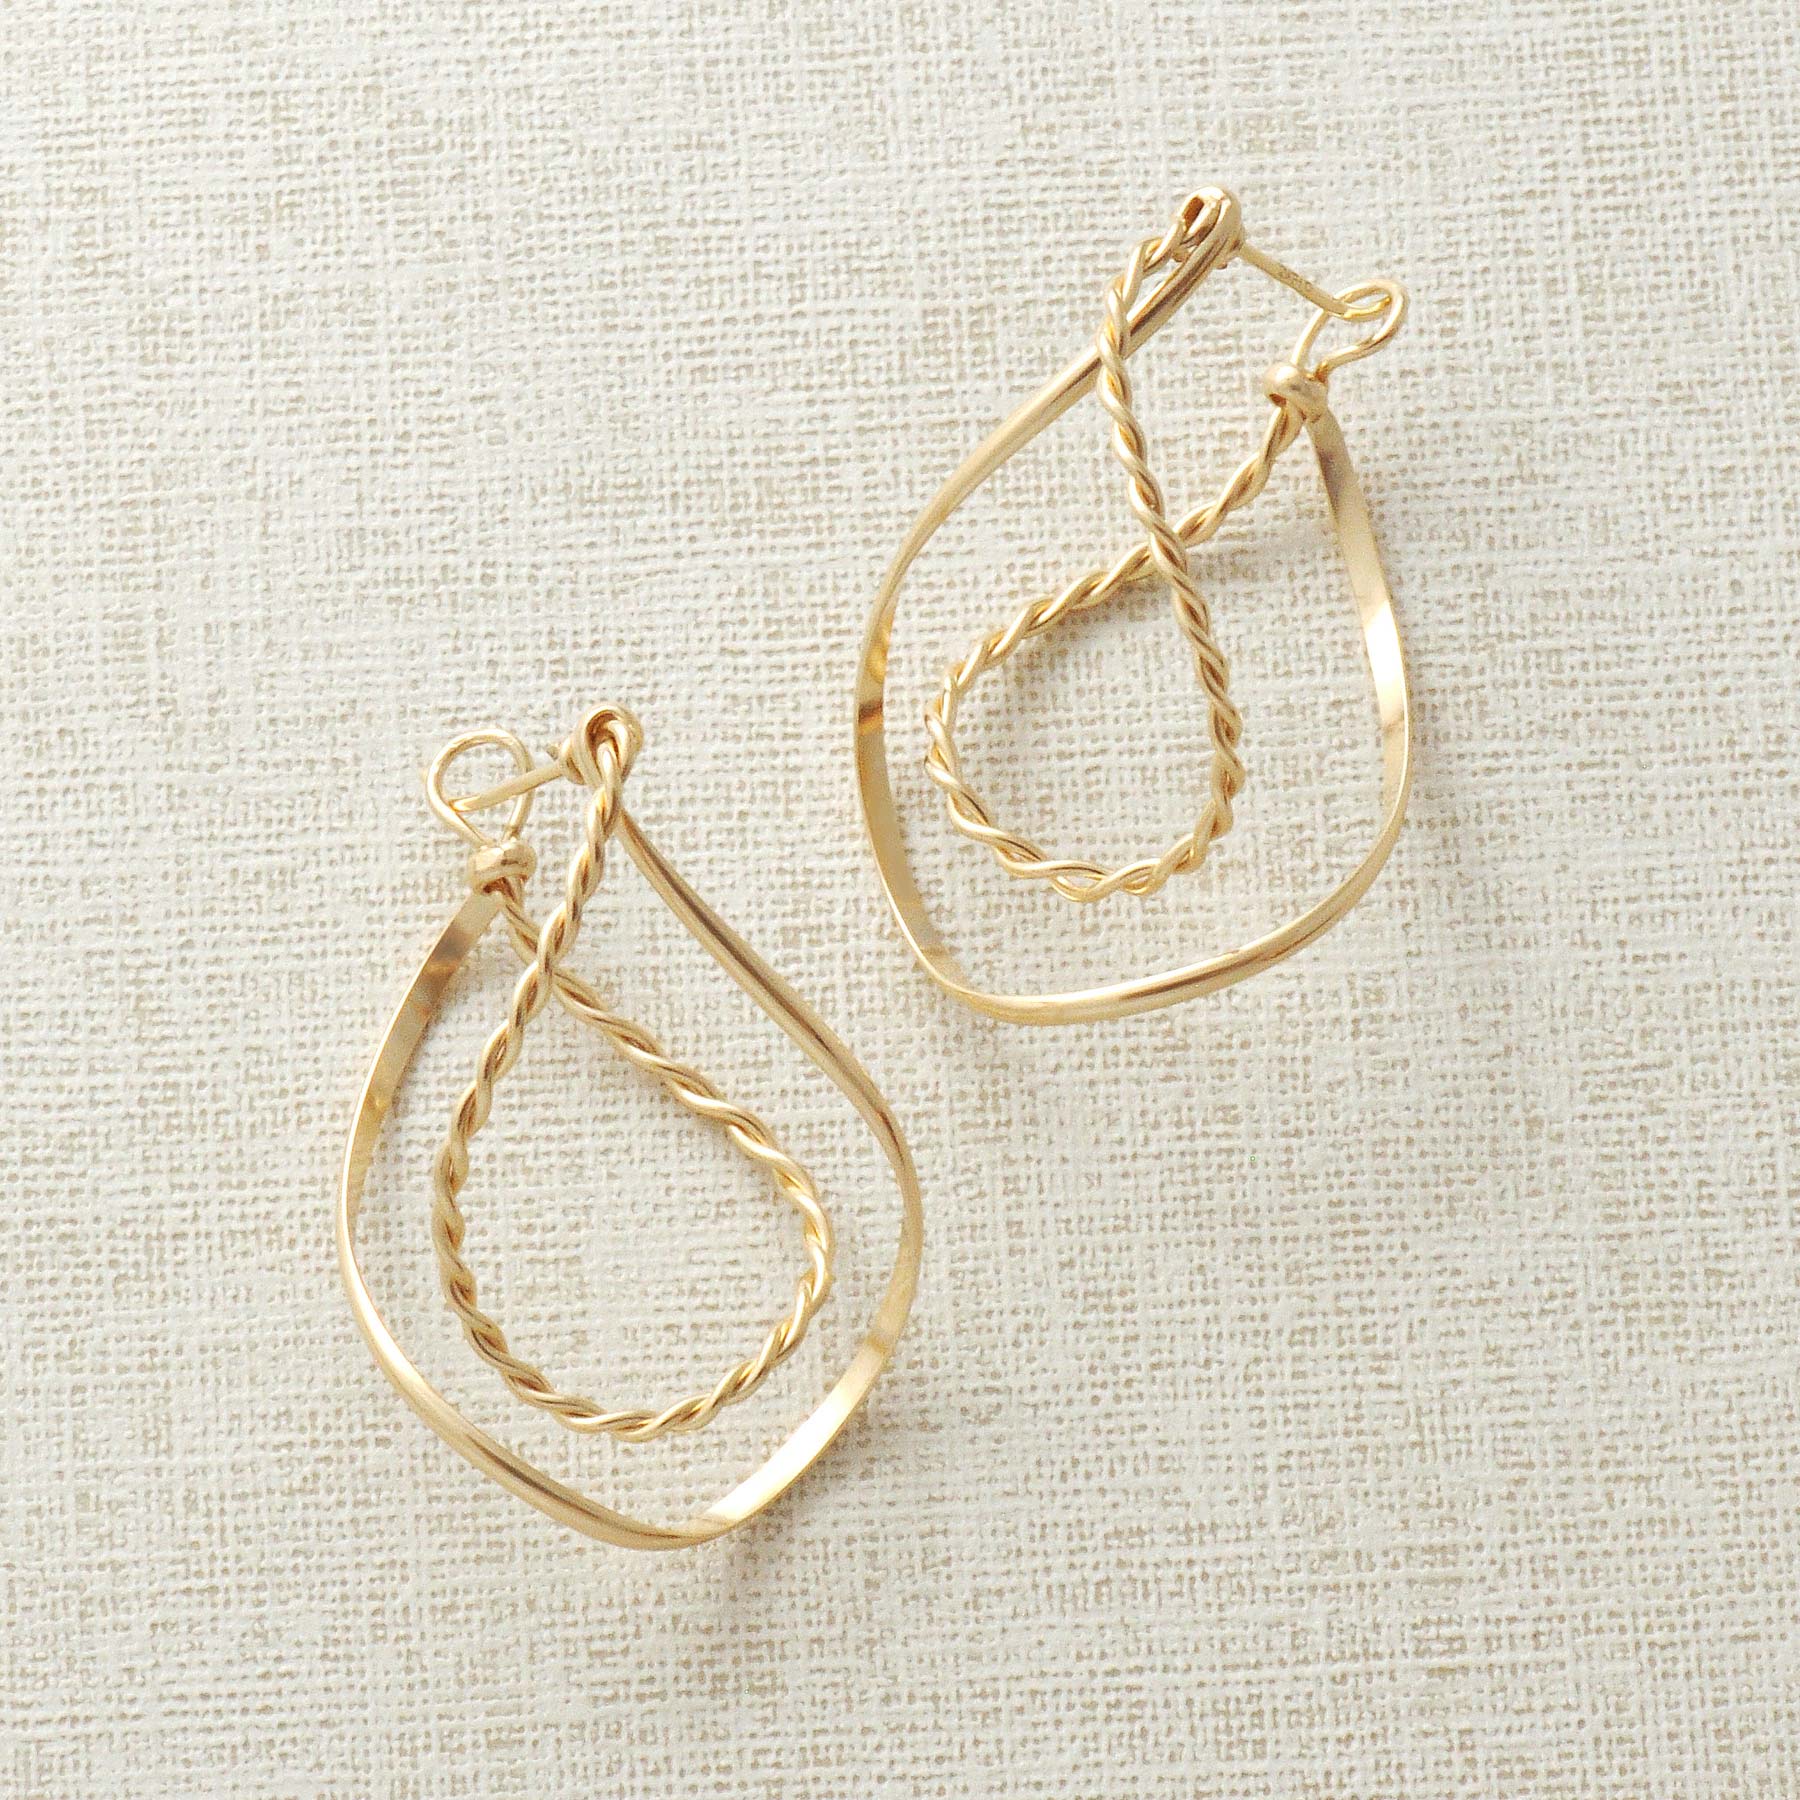 Gold Filled Twisted Dew Drop Hoop Earrings - Product Image